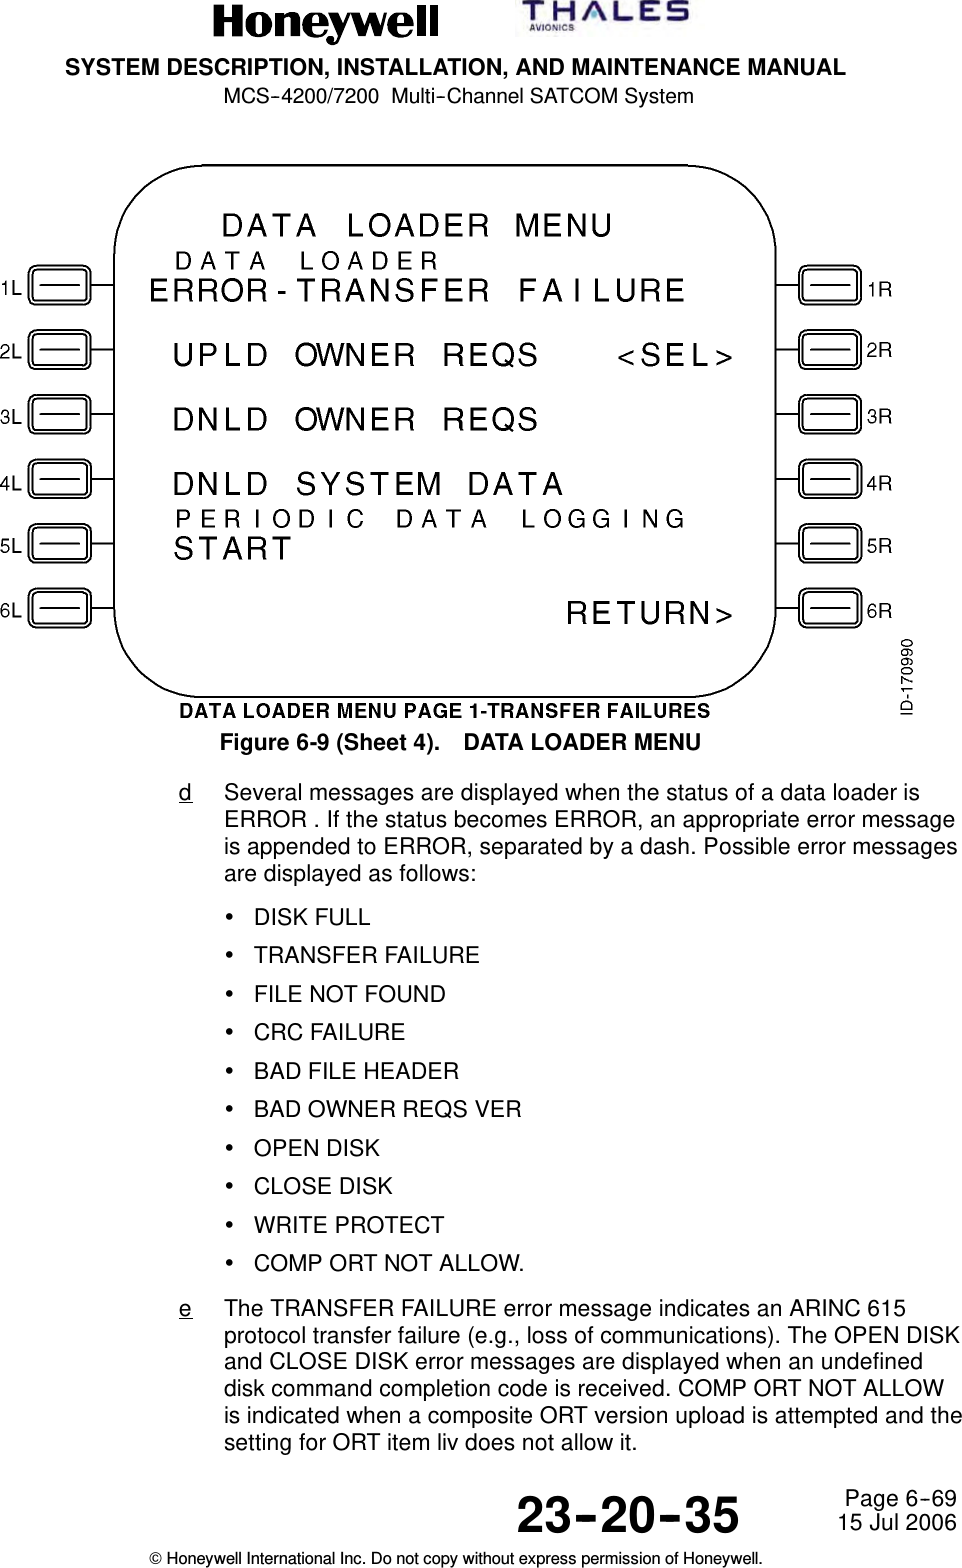 SYSTEM DESCRIPTION, INSTALLATION, AND MAINTENANCE MANUALMCS--4200/7200 Multi--Channel SATCOM System23--20--35 15 Jul 2006Honeywell International Inc. Do not copy without express permission of Honeywell.Page 6--69Figure 6-9 (Sheet 4). DATA LOADER MENUdSeveral messages are displayed when the status of a data loader isERROR . If the status becomes ERROR, an appropriate error messageis appended to ERROR, separated by a dash. Possible error messagesare displayed as follows:•DISK FULL•TRANSFER FAILURE•FILE NOT FOUND•CRC FAILURE•BAD FILE HEADER•BAD OWNER REQS VER•OPEN DISK•CLOSE DISK•WRITE PROTECT•COMP ORT NOT ALLOW.eThe TRANSFER FAILURE error message indicates an ARINC 615protocol transfer failure (e.g., loss of communications). The OPEN DISKand CLOSE DISK error messages are displayed when an undefineddisk command completion code is received. COMP ORT NOT ALLOWis indicated when a composite ORT version upload is attempted and thesetting for ORT item liv does not allow it.